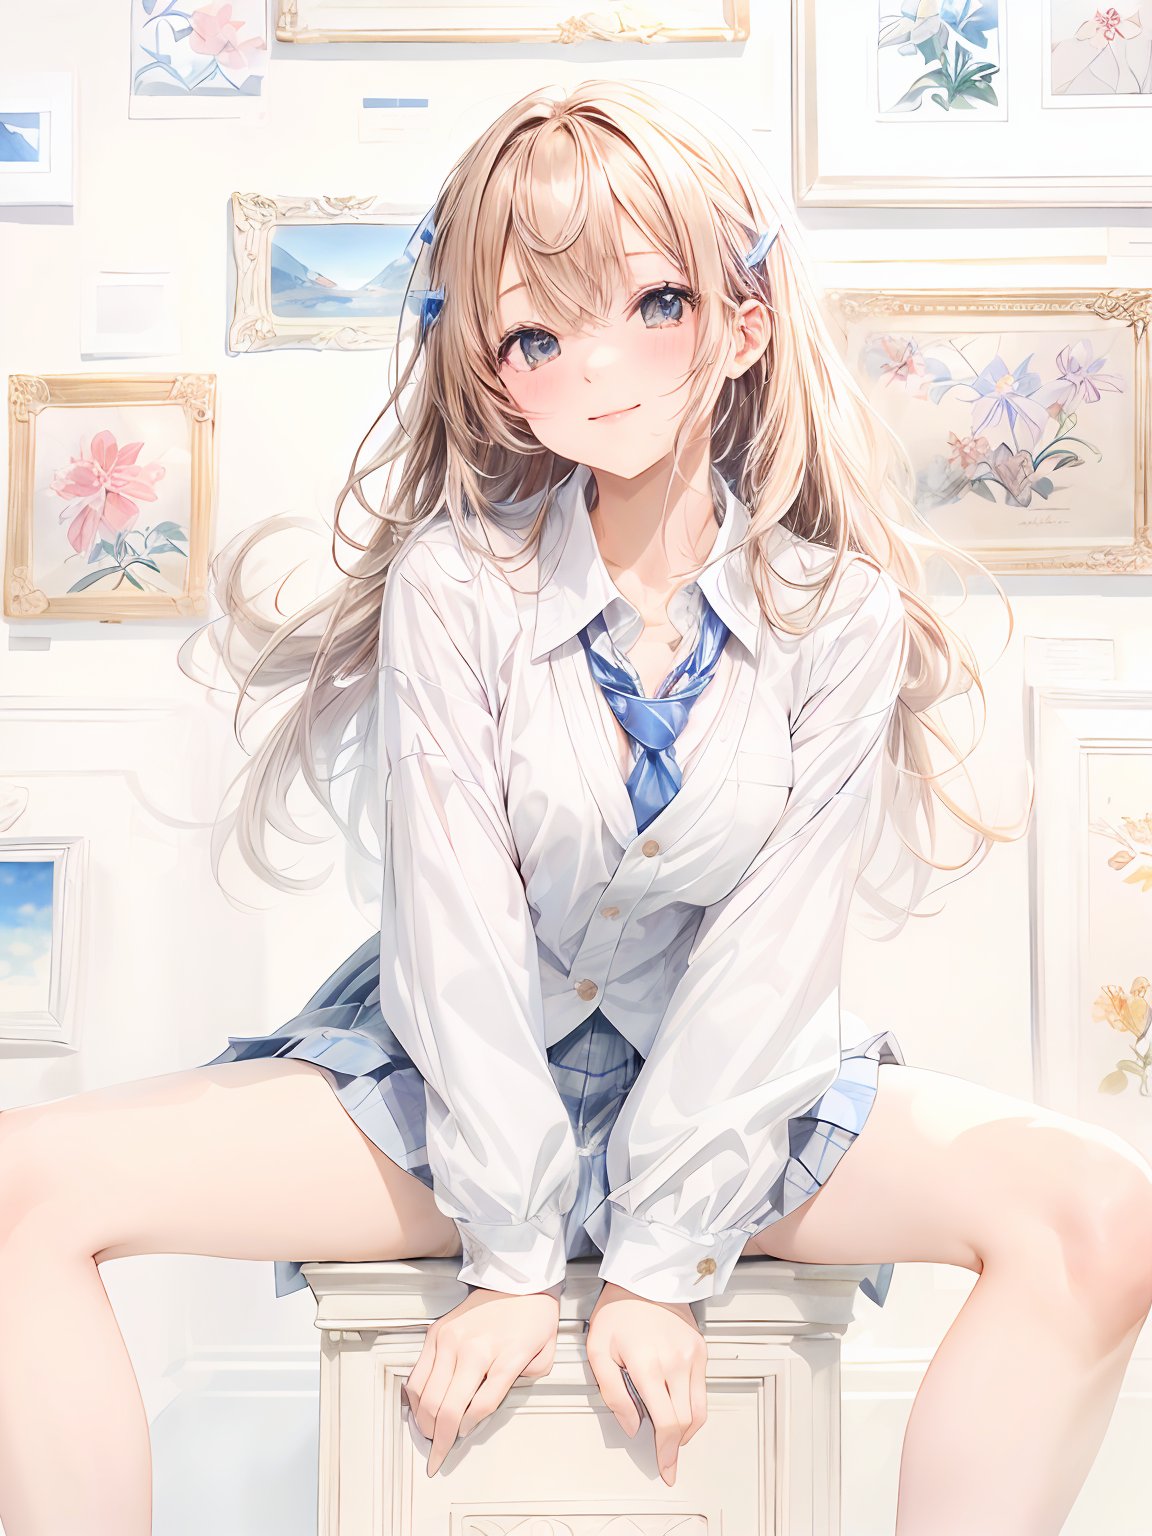 Anime 1152x1536 anime anime girls AI art portrait display schoolgirl school uniform looking at viewer smiling long hair sitting picture frames